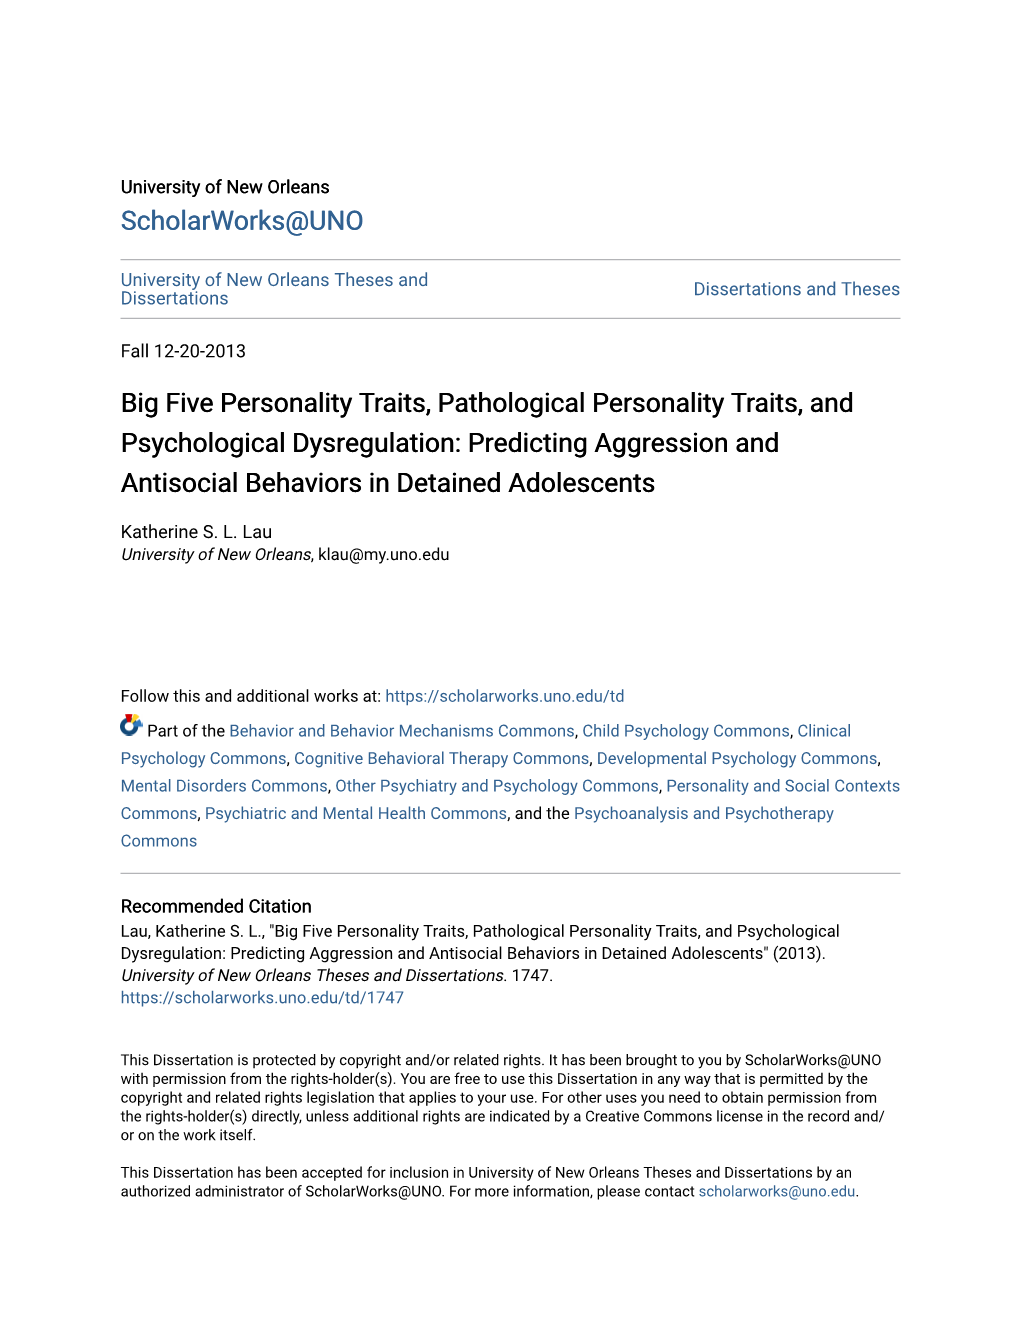 Big Five Personality Traits, Pathological Personality Traits, and Psychological Dysregulation: Predicting Aggression and Antisocial Behaviors in Detained Adolescents